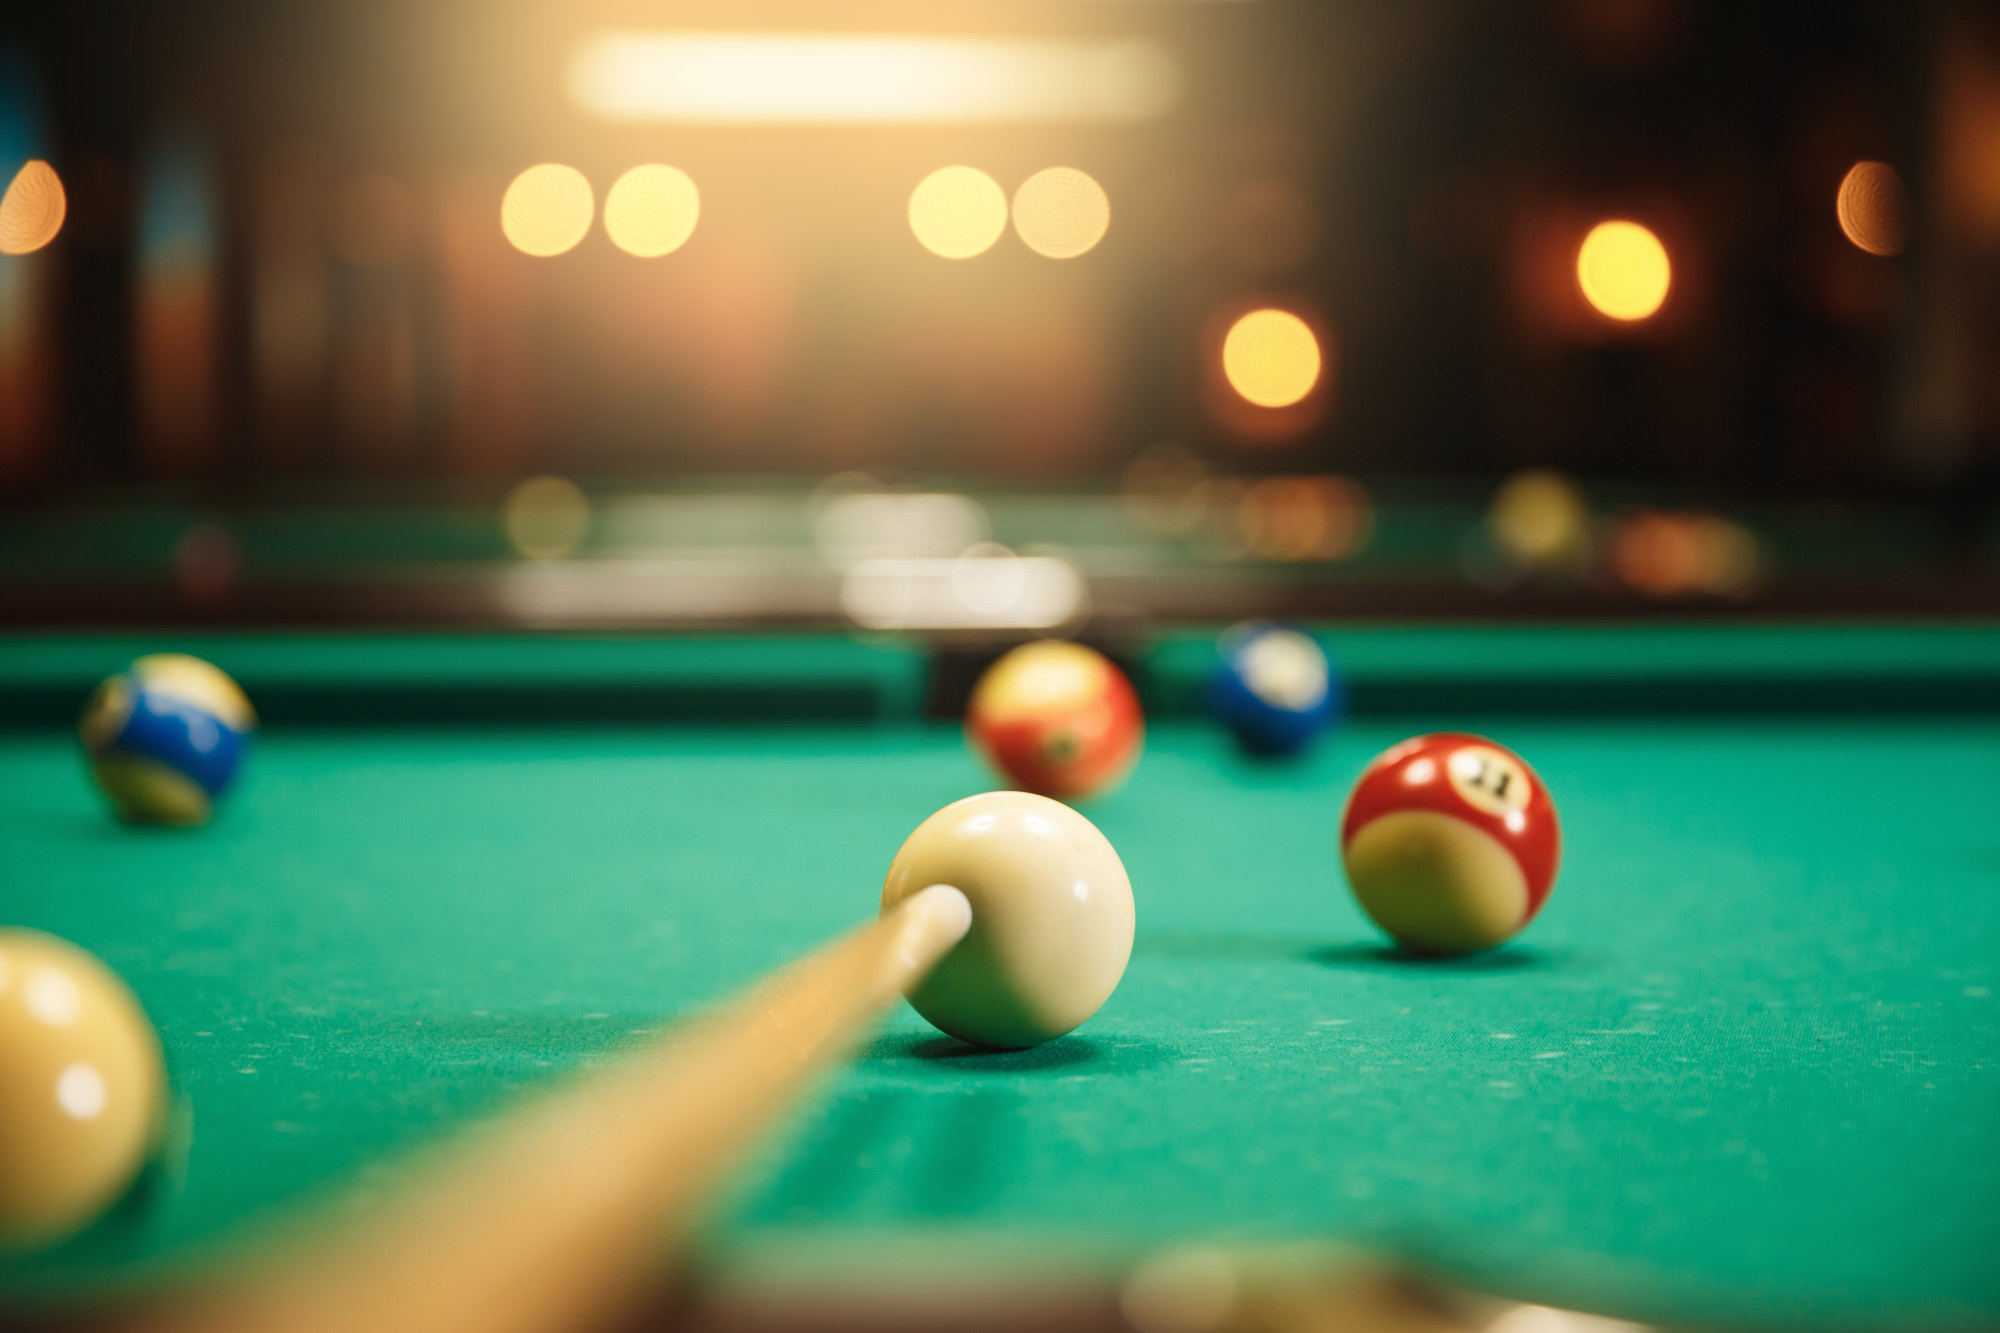 Cue Sports: Eight-ball, A classic American-style game for a good recreational activity. 2000x1340 HD Wallpaper.